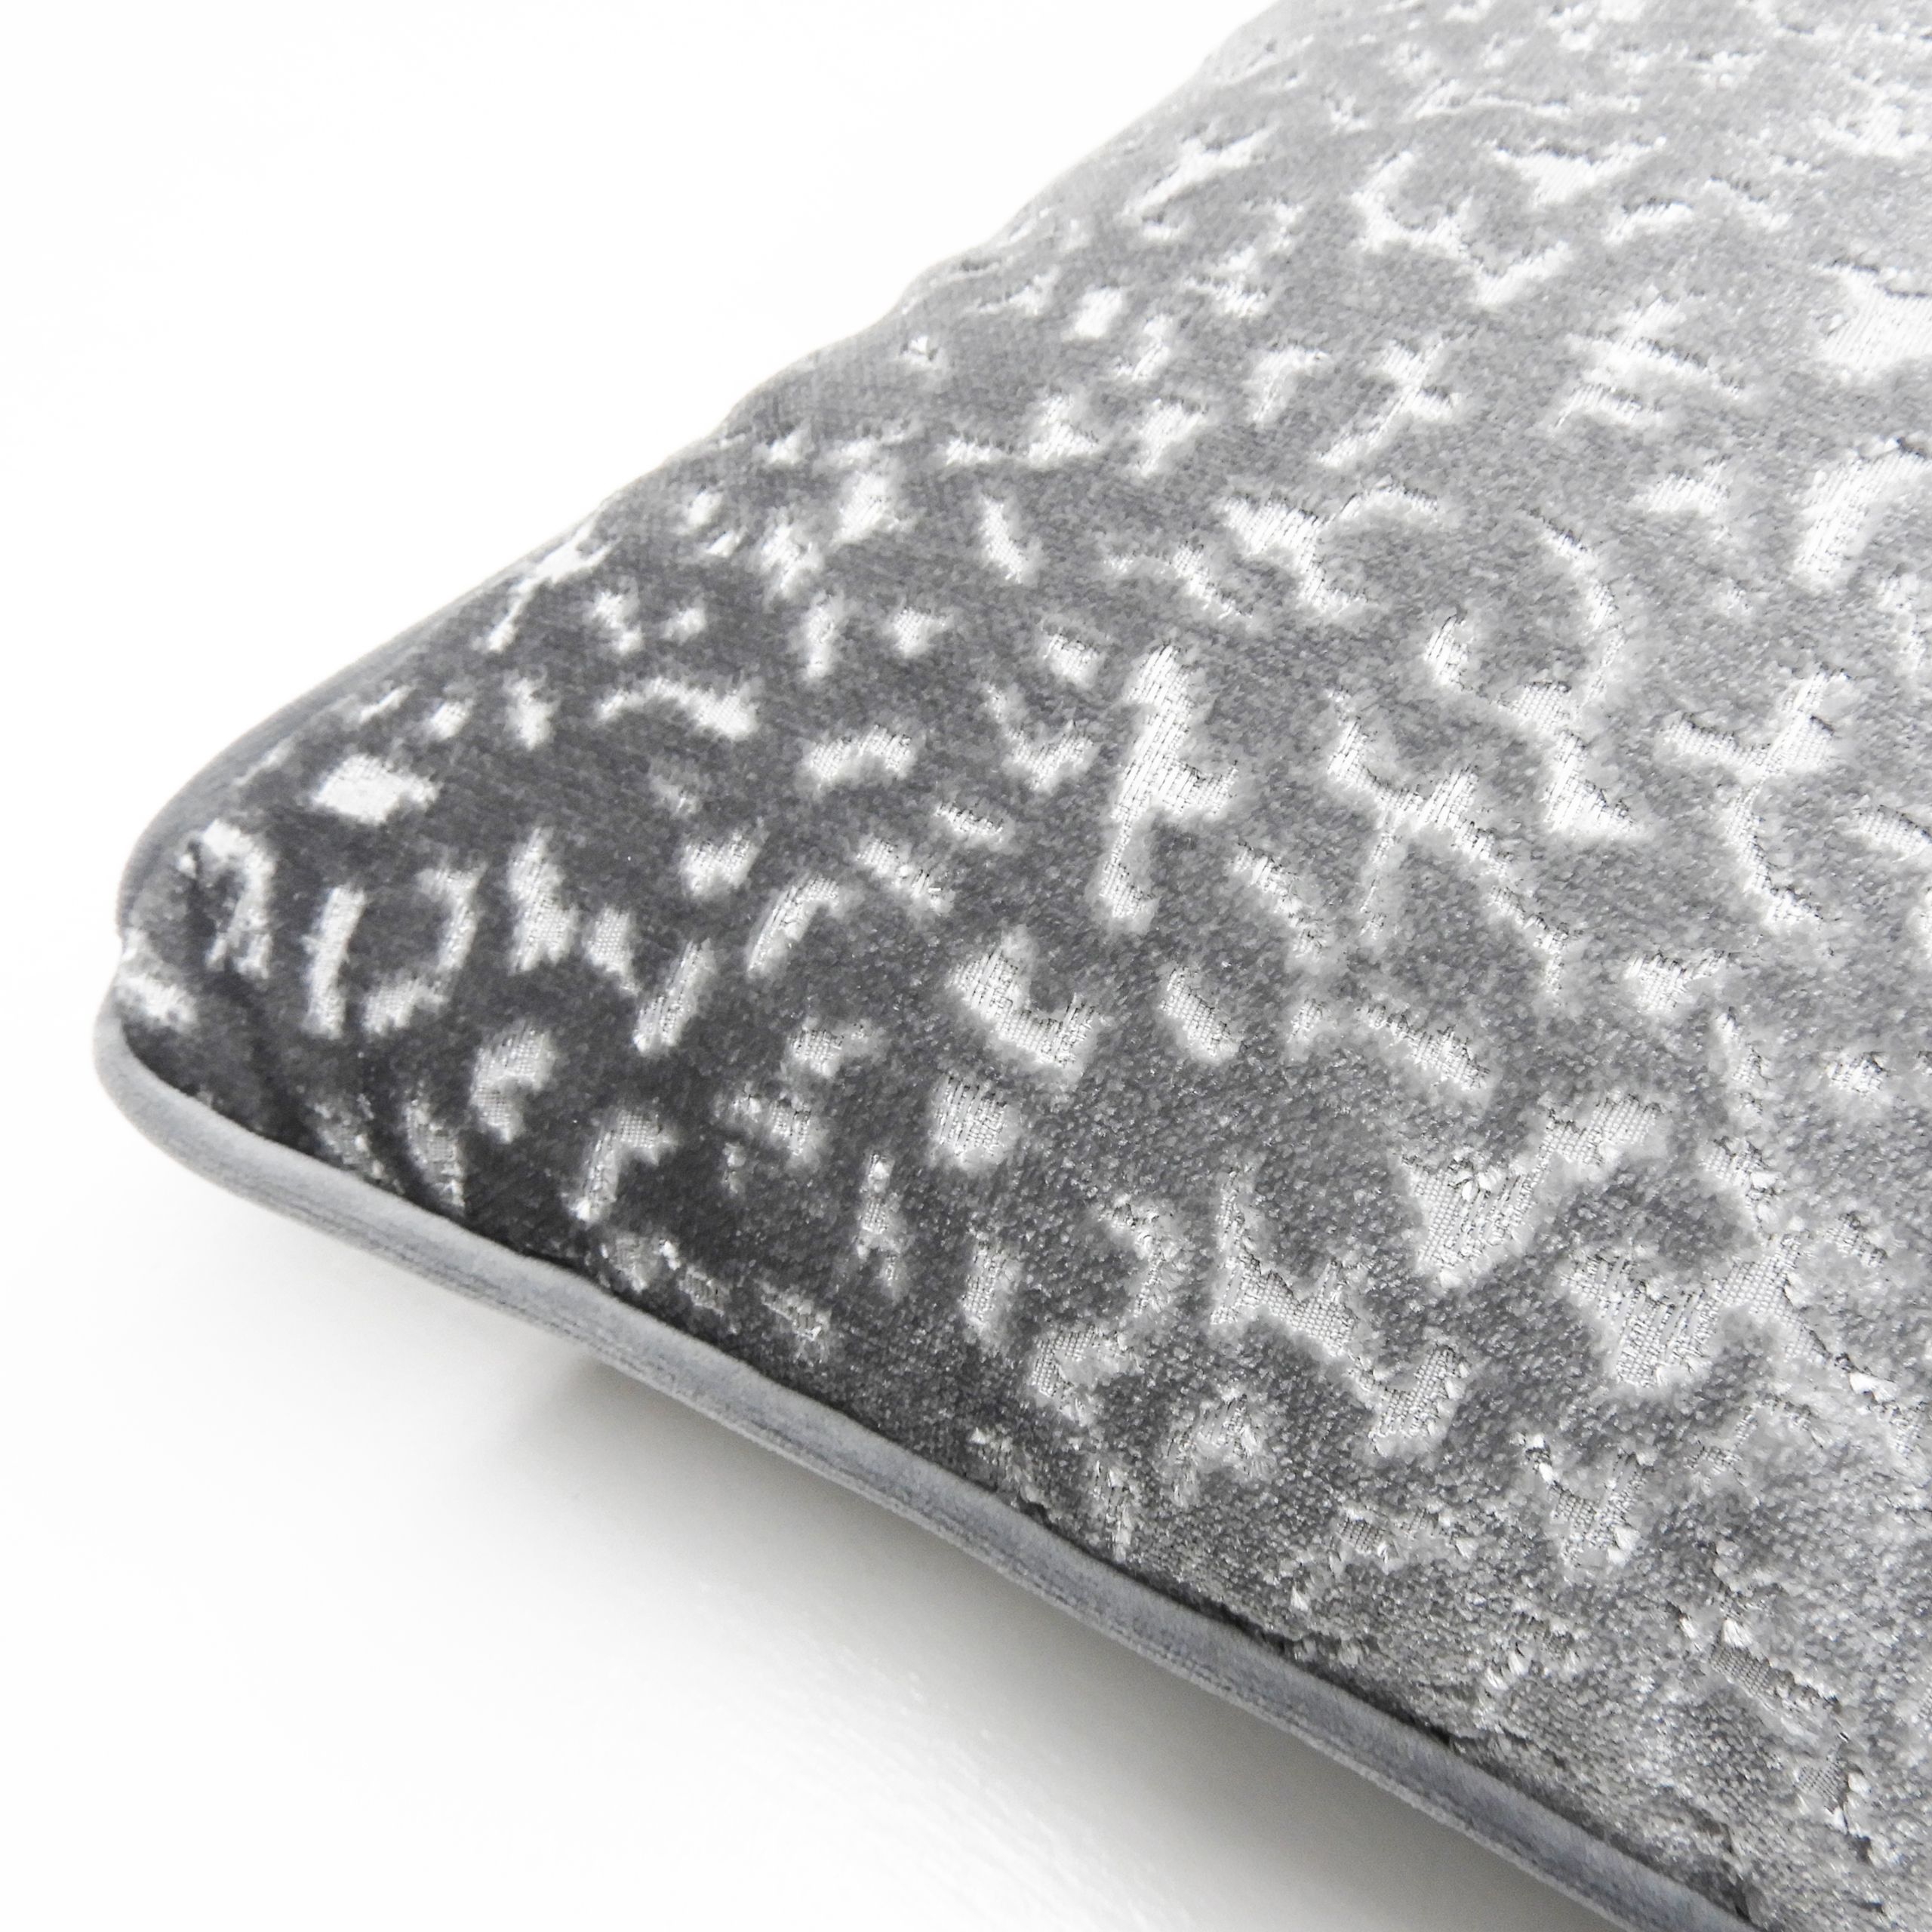 A luxurious sculpted velvet cushion with exquisite co-ordinating plain velvet piping.